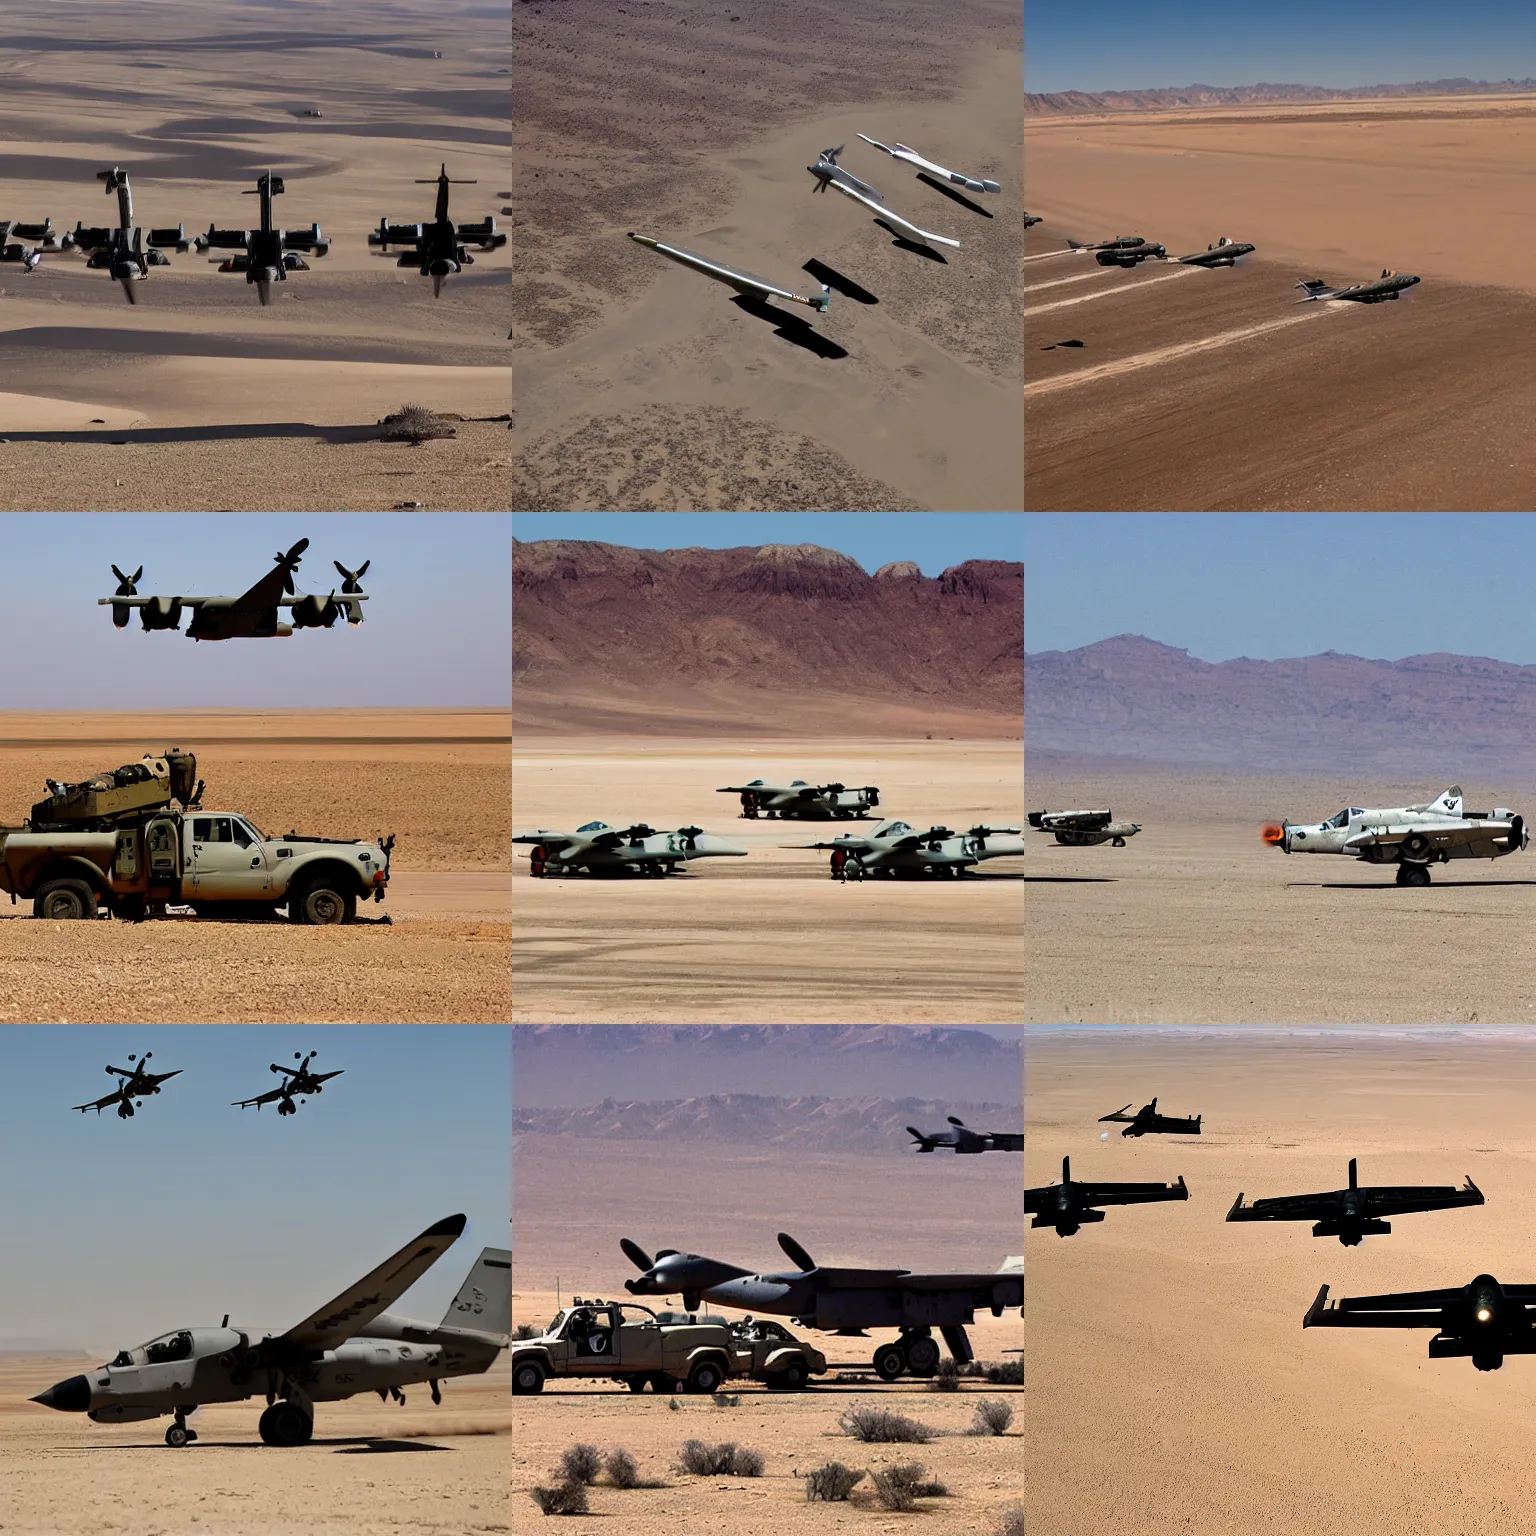 Prompt: an a - 1 0 warthog ground attack aircraft staffing a small group of vehicles in the desert